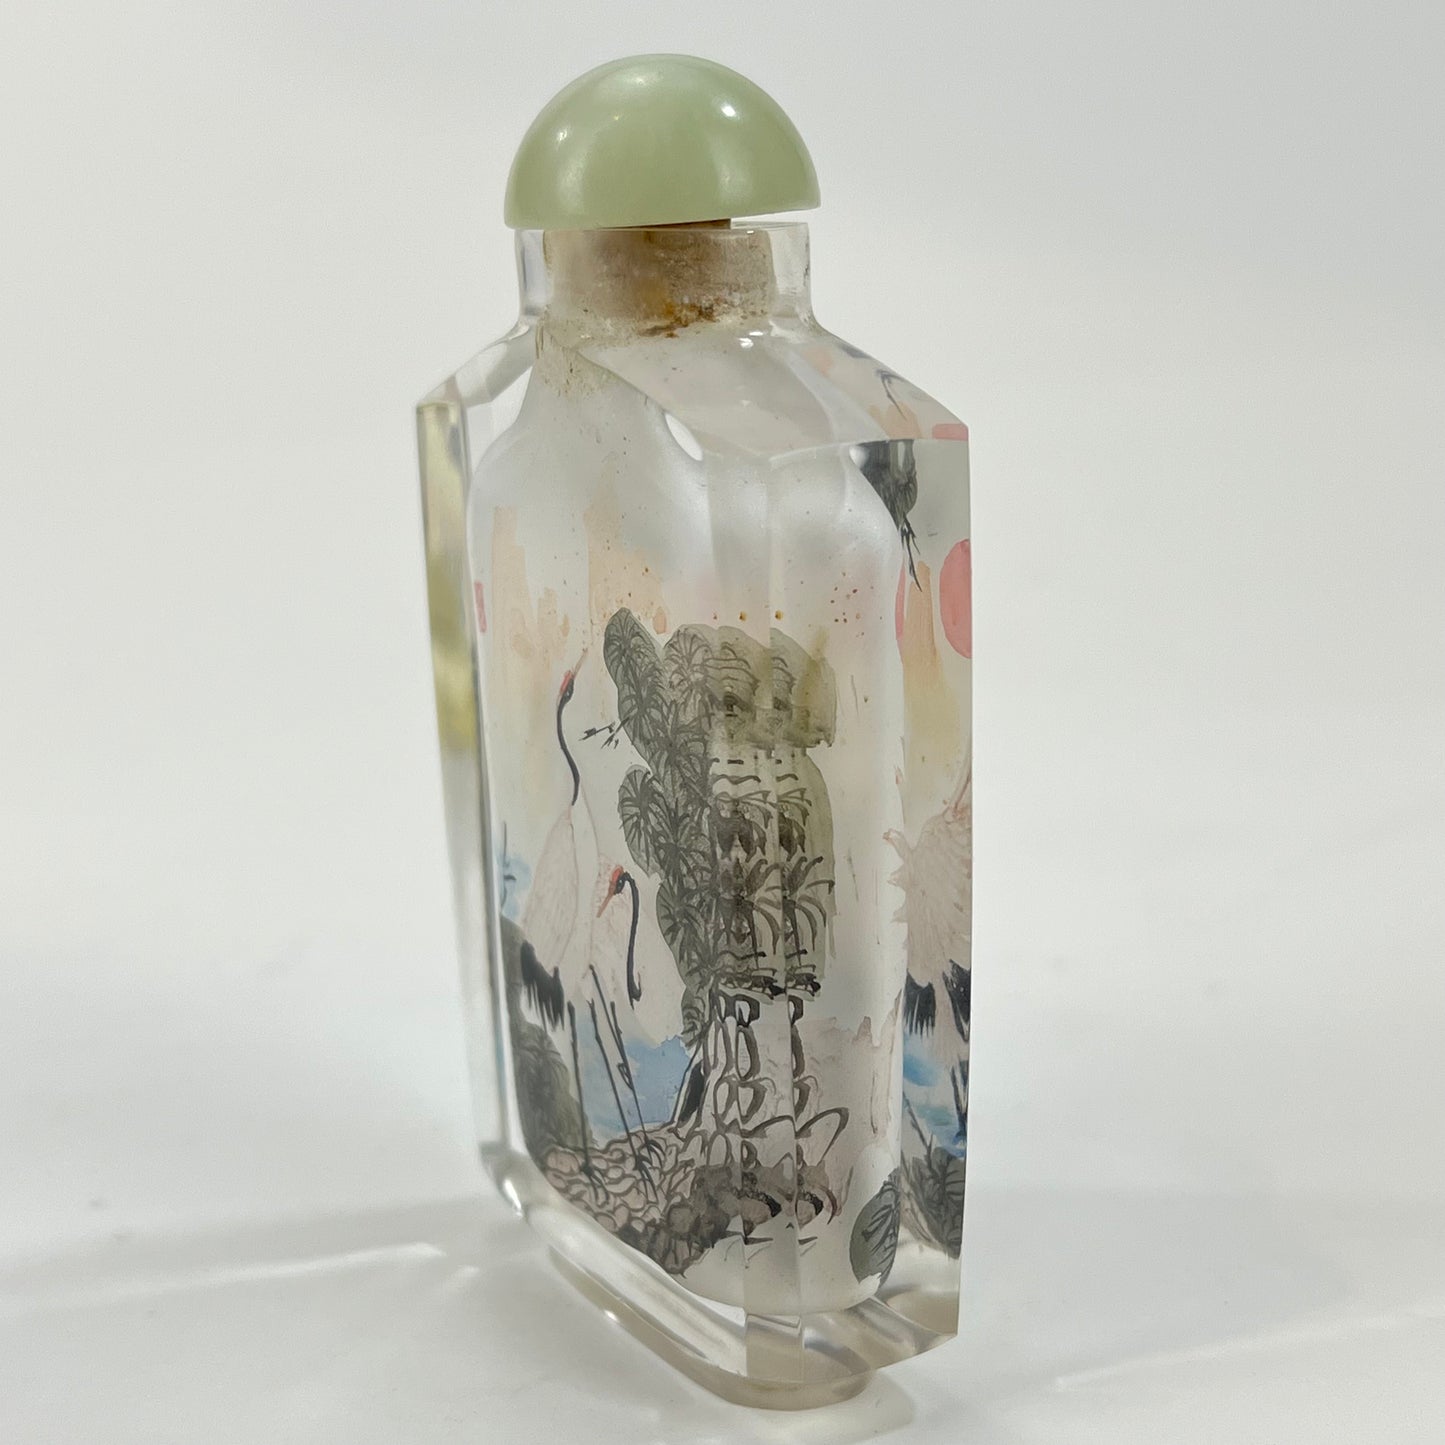 Vintage Chinese Signed Snuff Bottle Reverse-Painted Crane Motif 3"